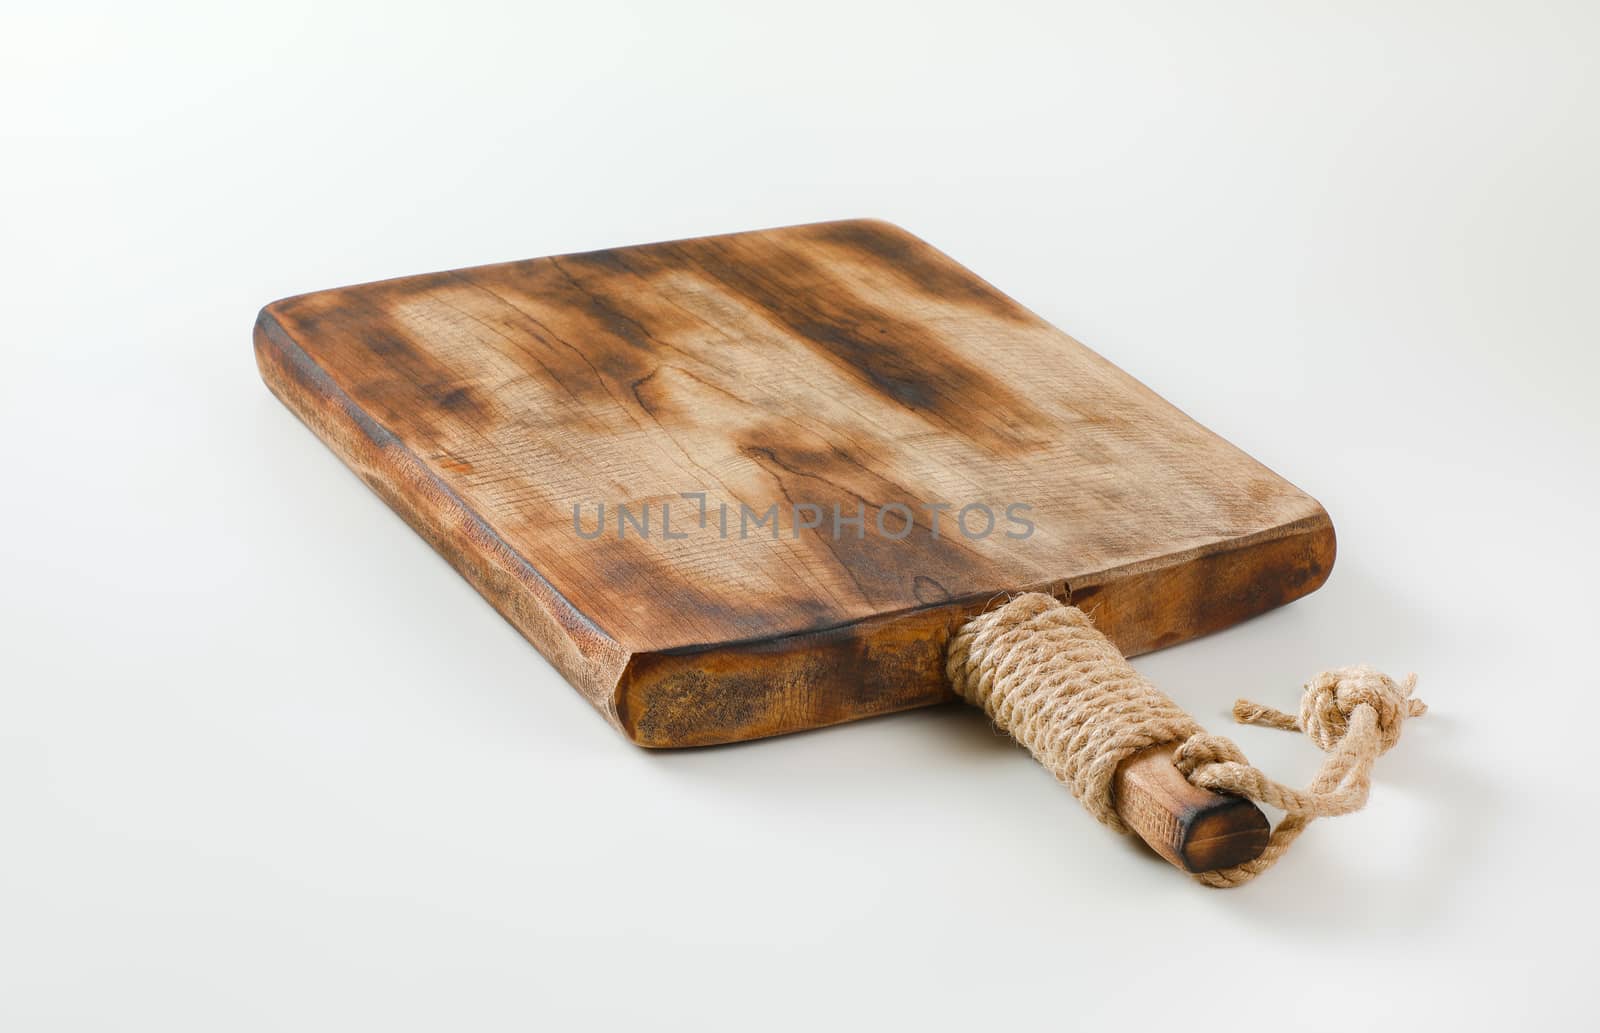 Rustic wooden cutting board or serving tray by Digifoodstock